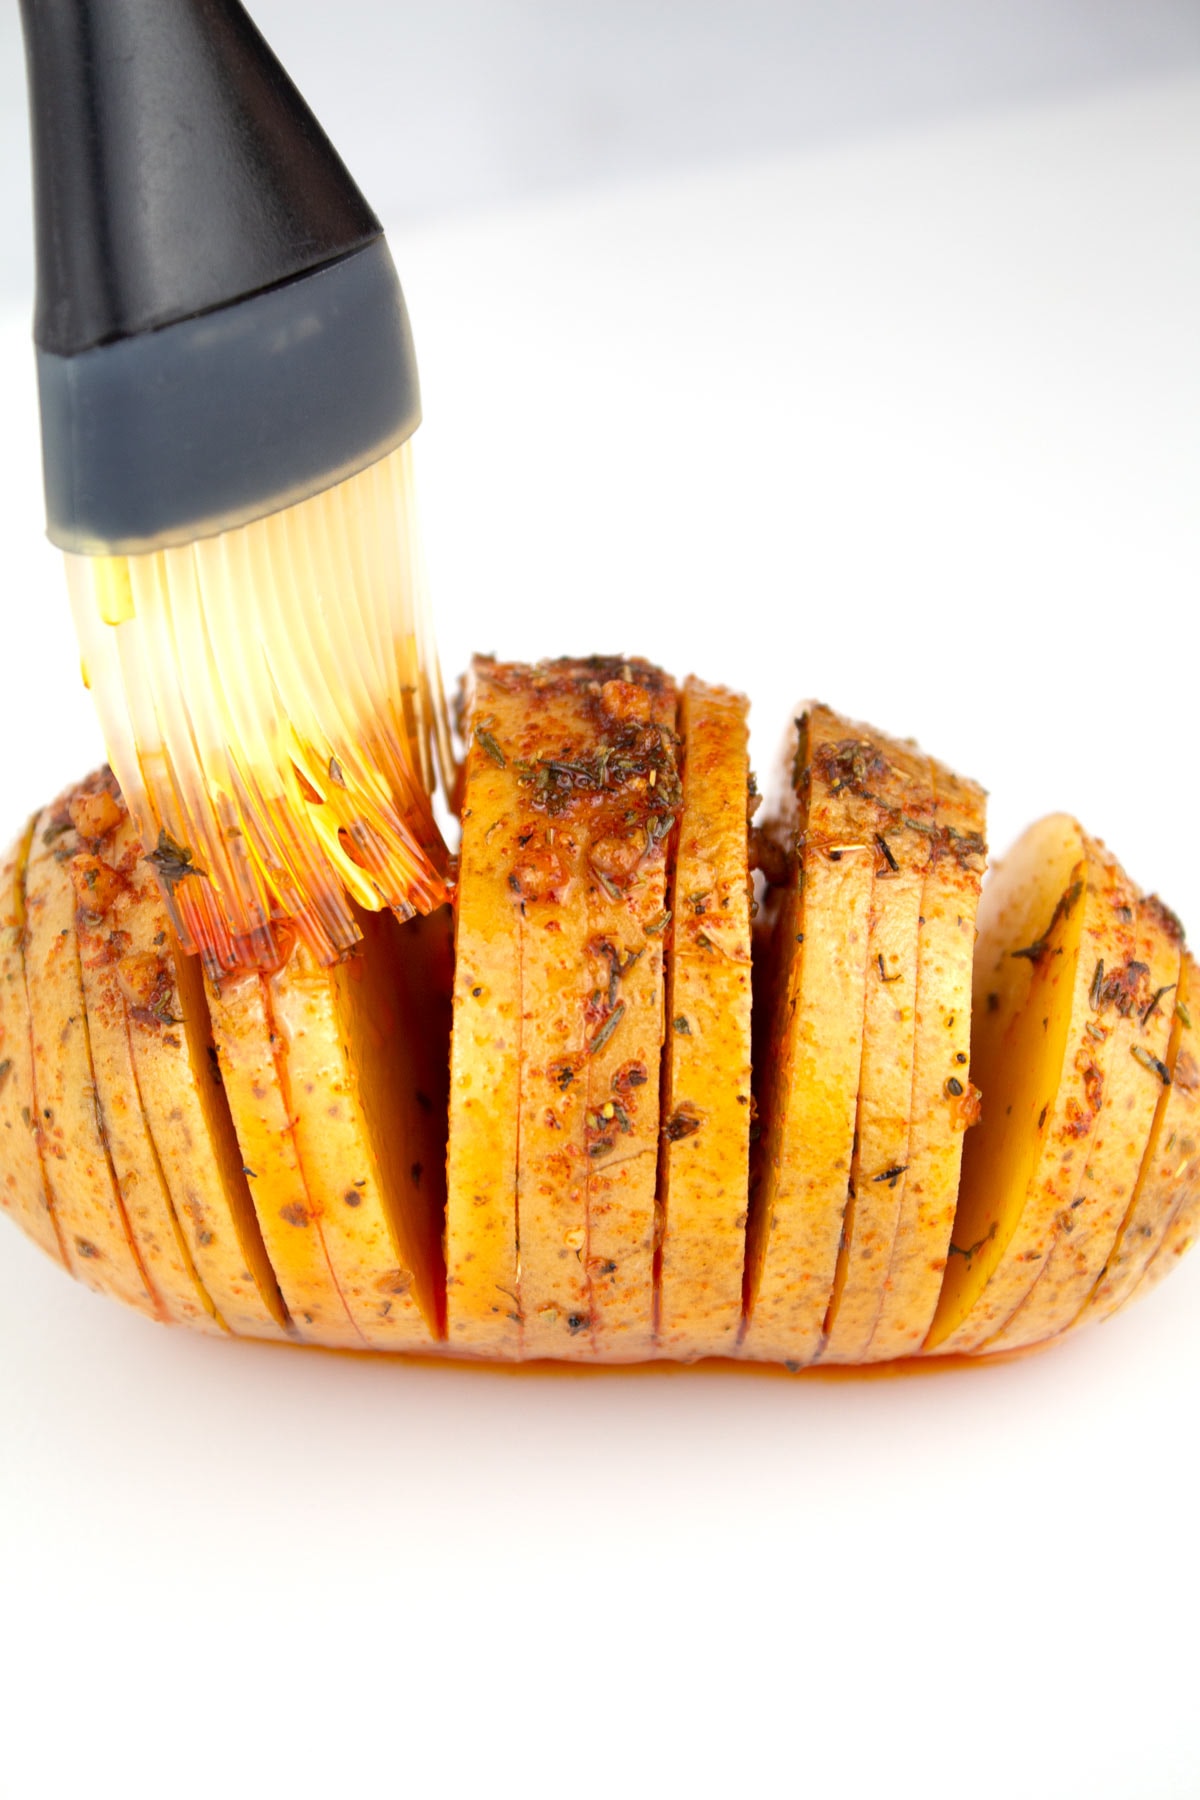 Silicone brush coating a potato with oil and seasonings.